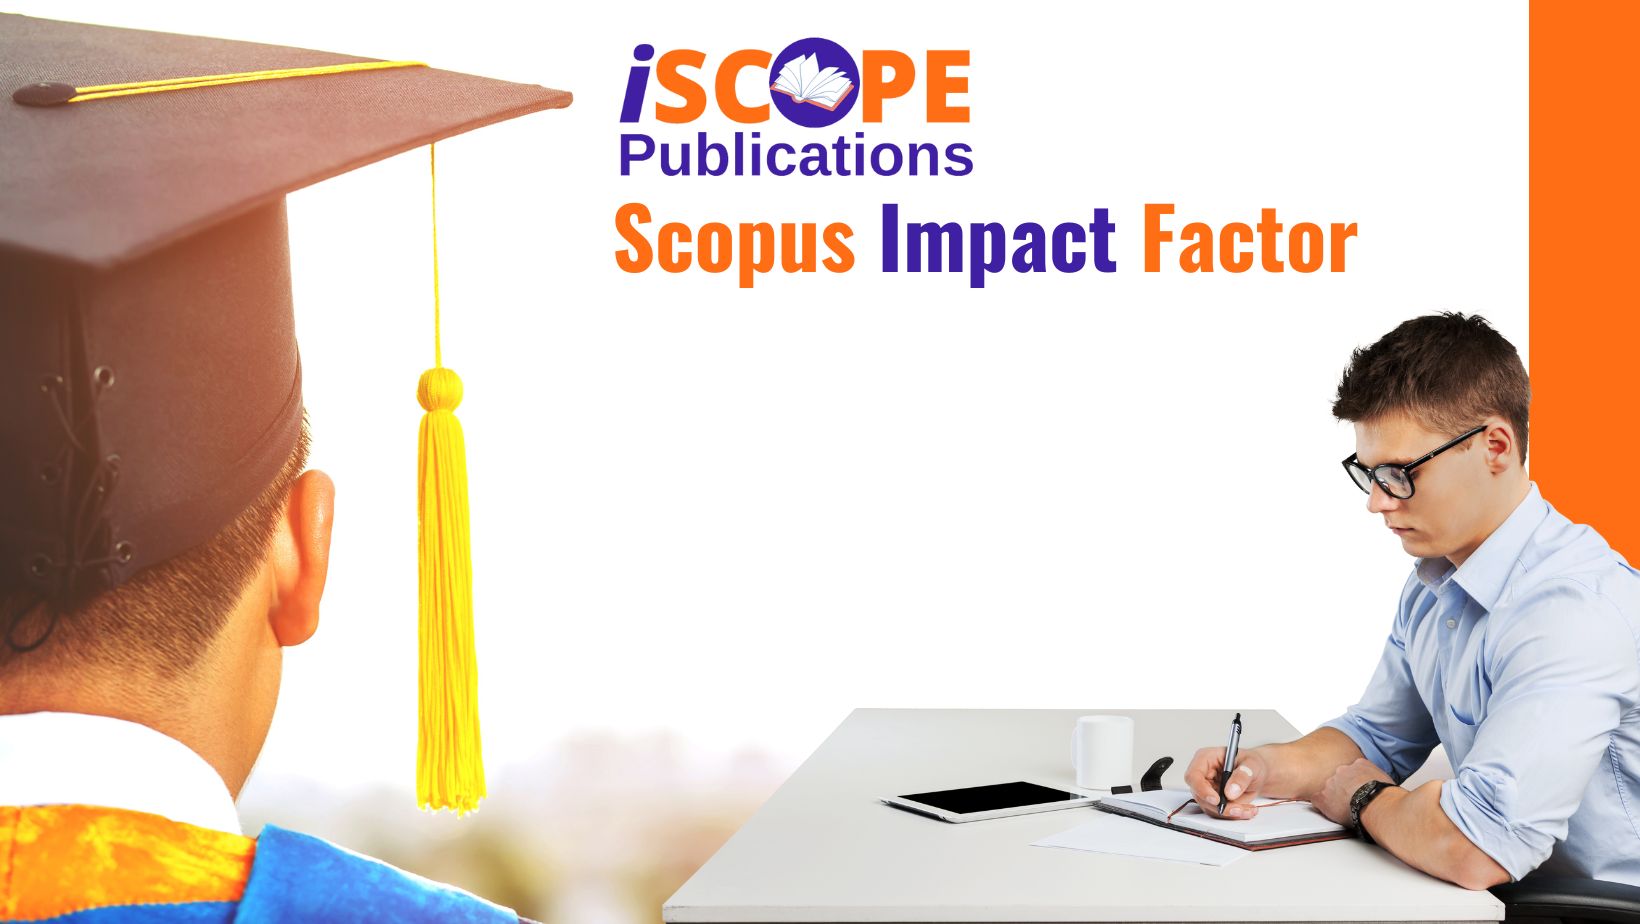 How to Improve Your Journal’s Scopus Impact Factor?